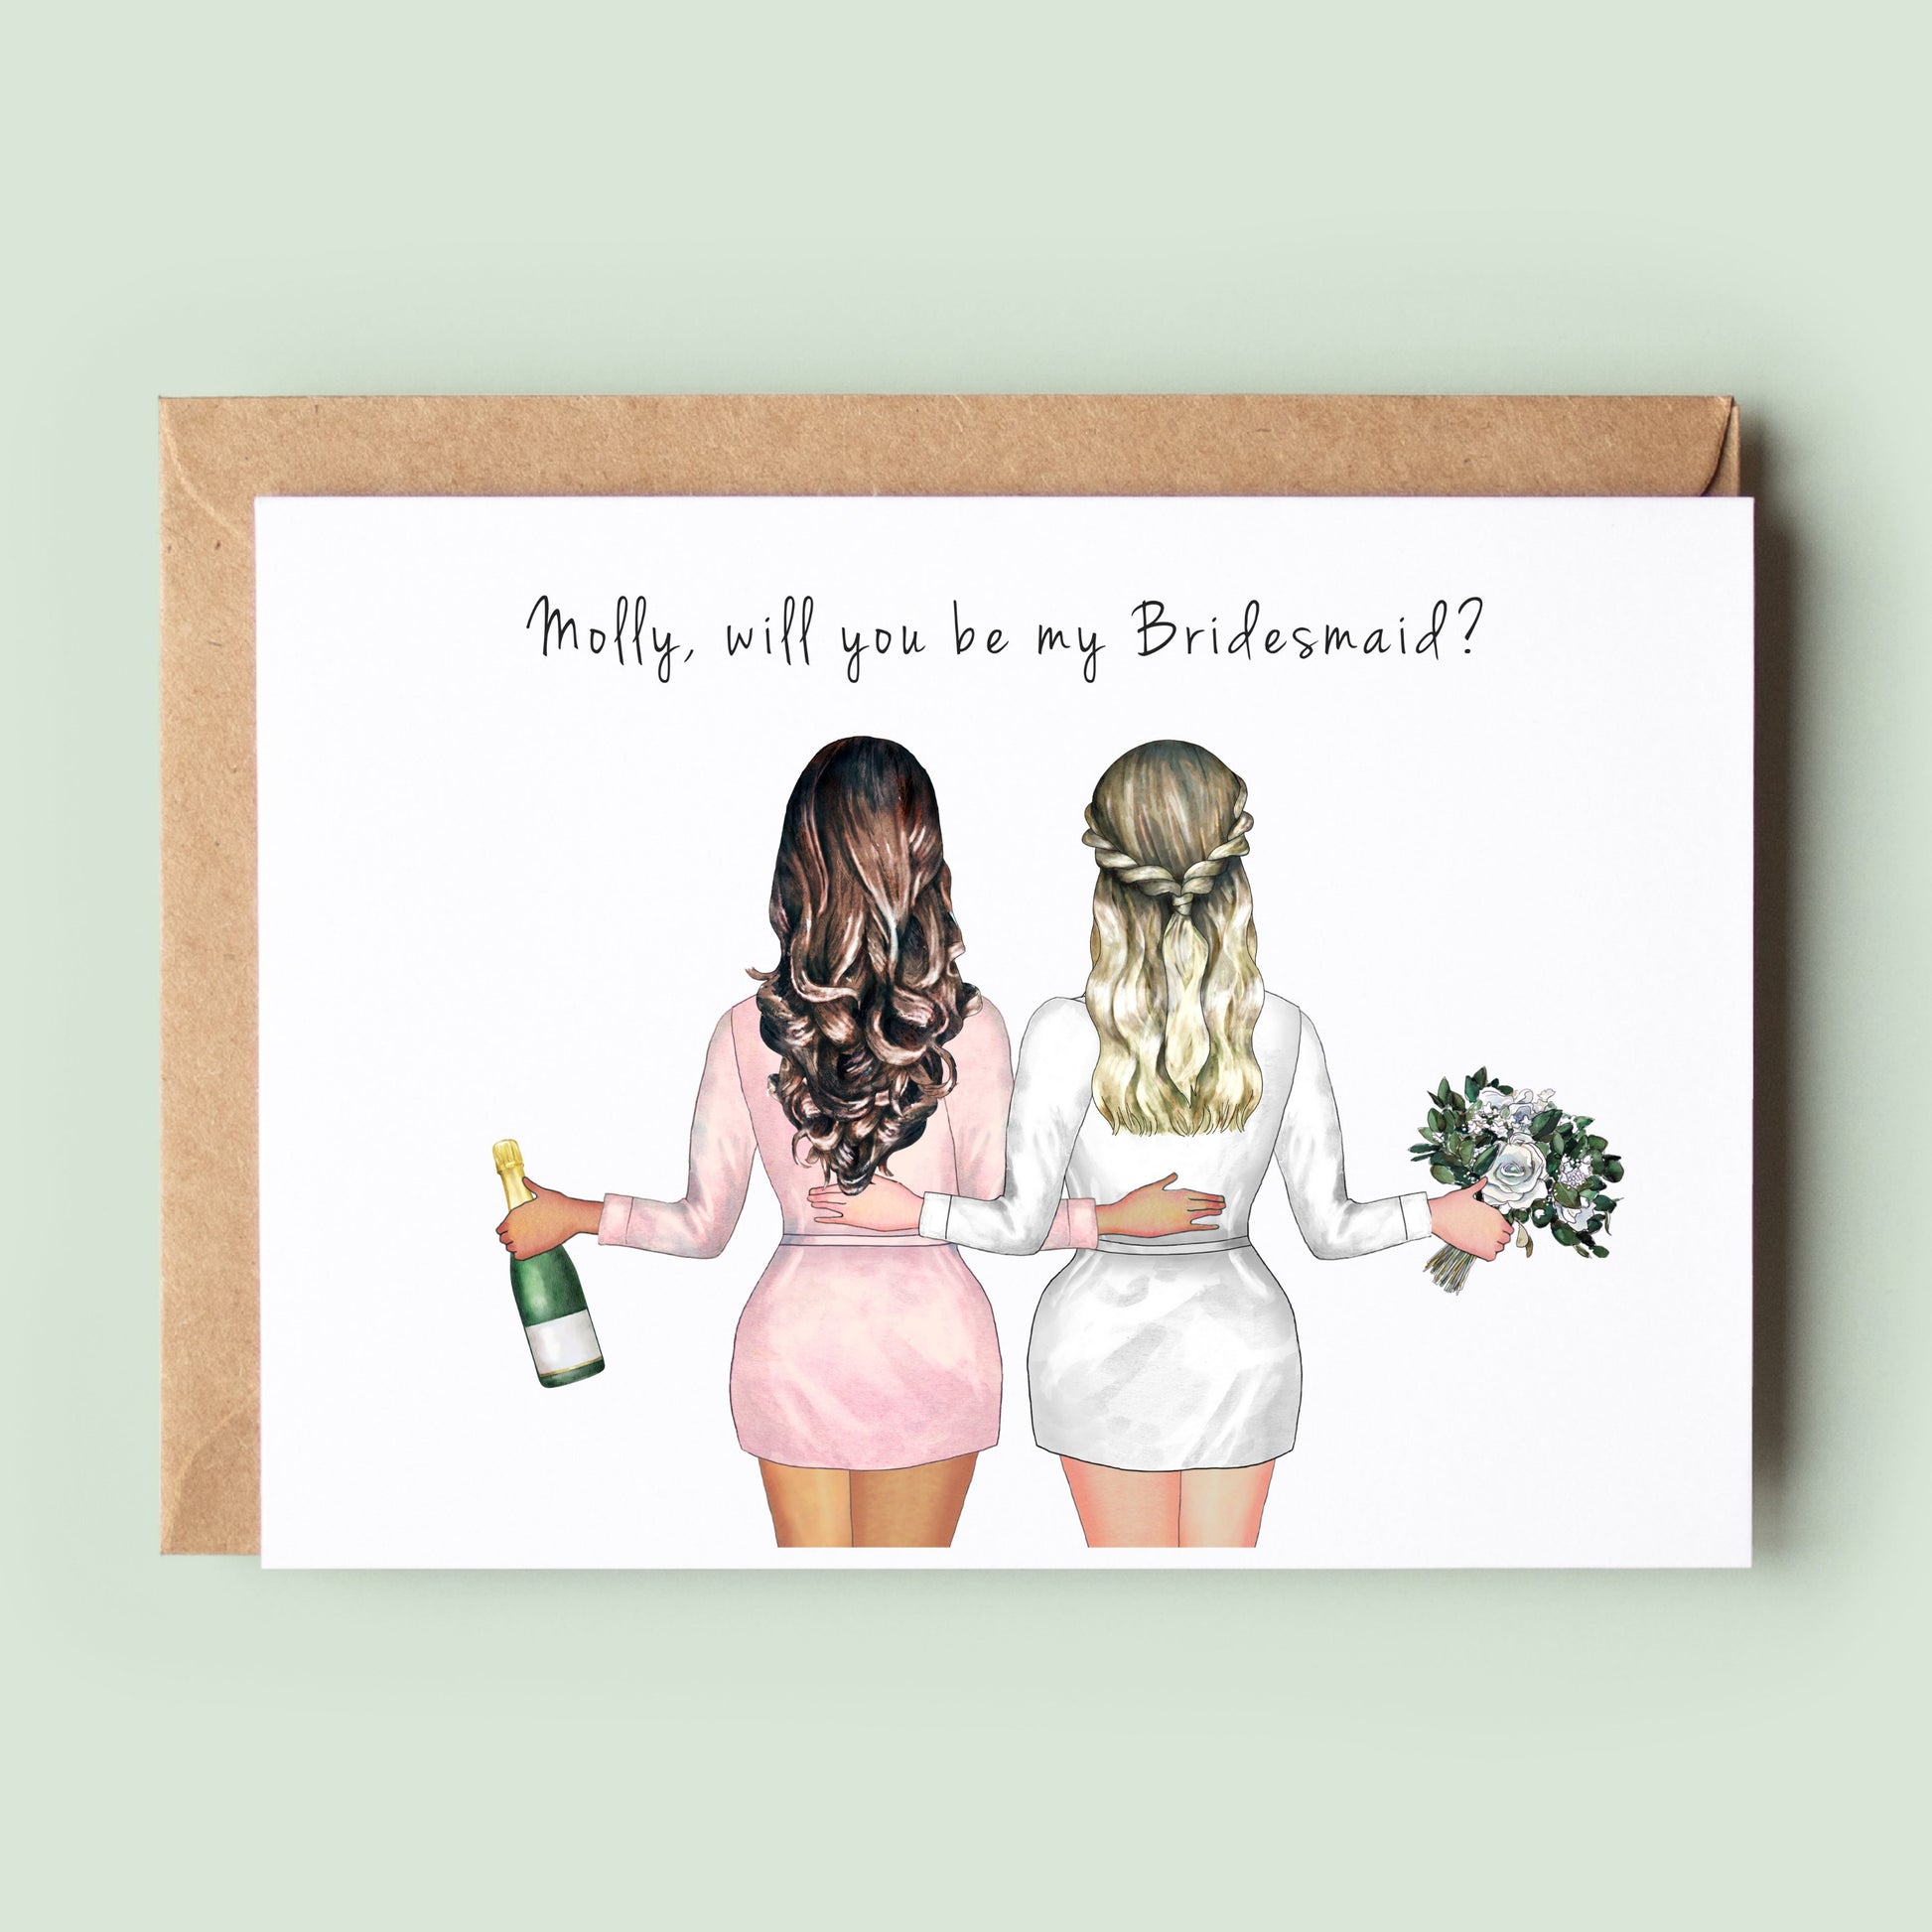 Will You Be My Bridesmaid Card, Will You Be My Maid of Honor Card, Bridesmaid Proposal Cards, Thank you for being my Bridesmaid, Card - #059